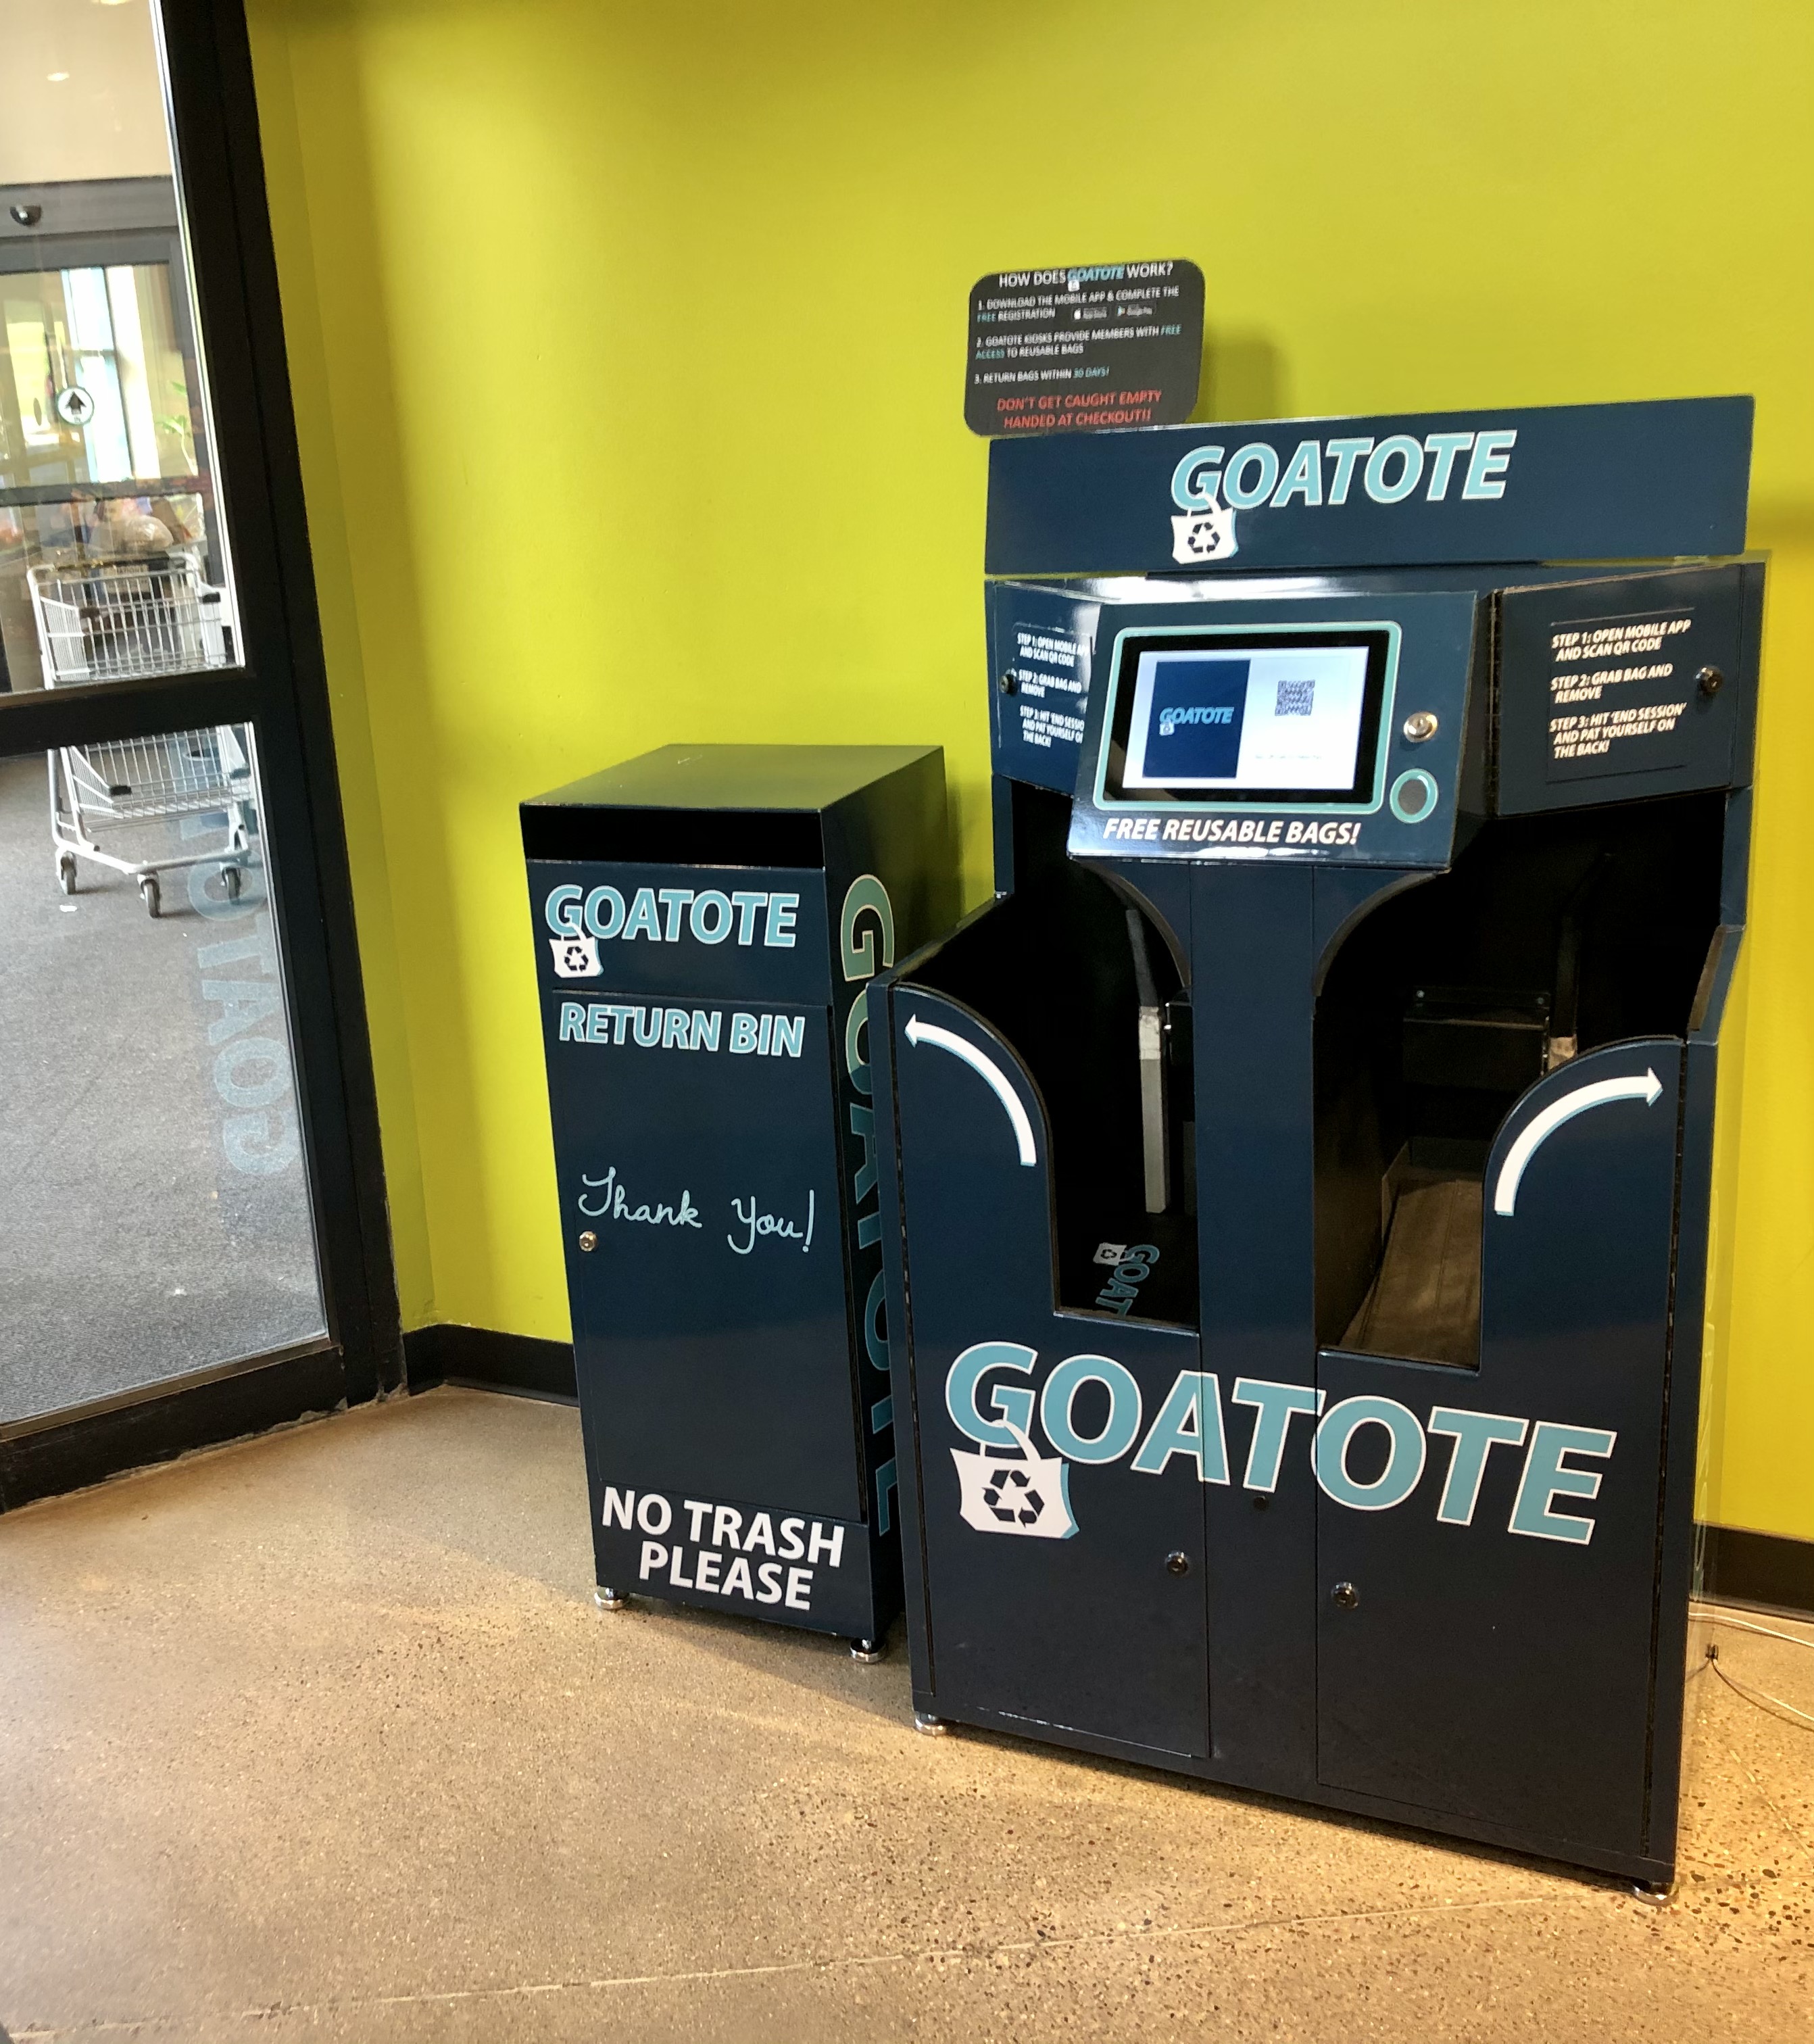 In the entryway of a store, a collection box and a kiosk are labeled GOATOTE